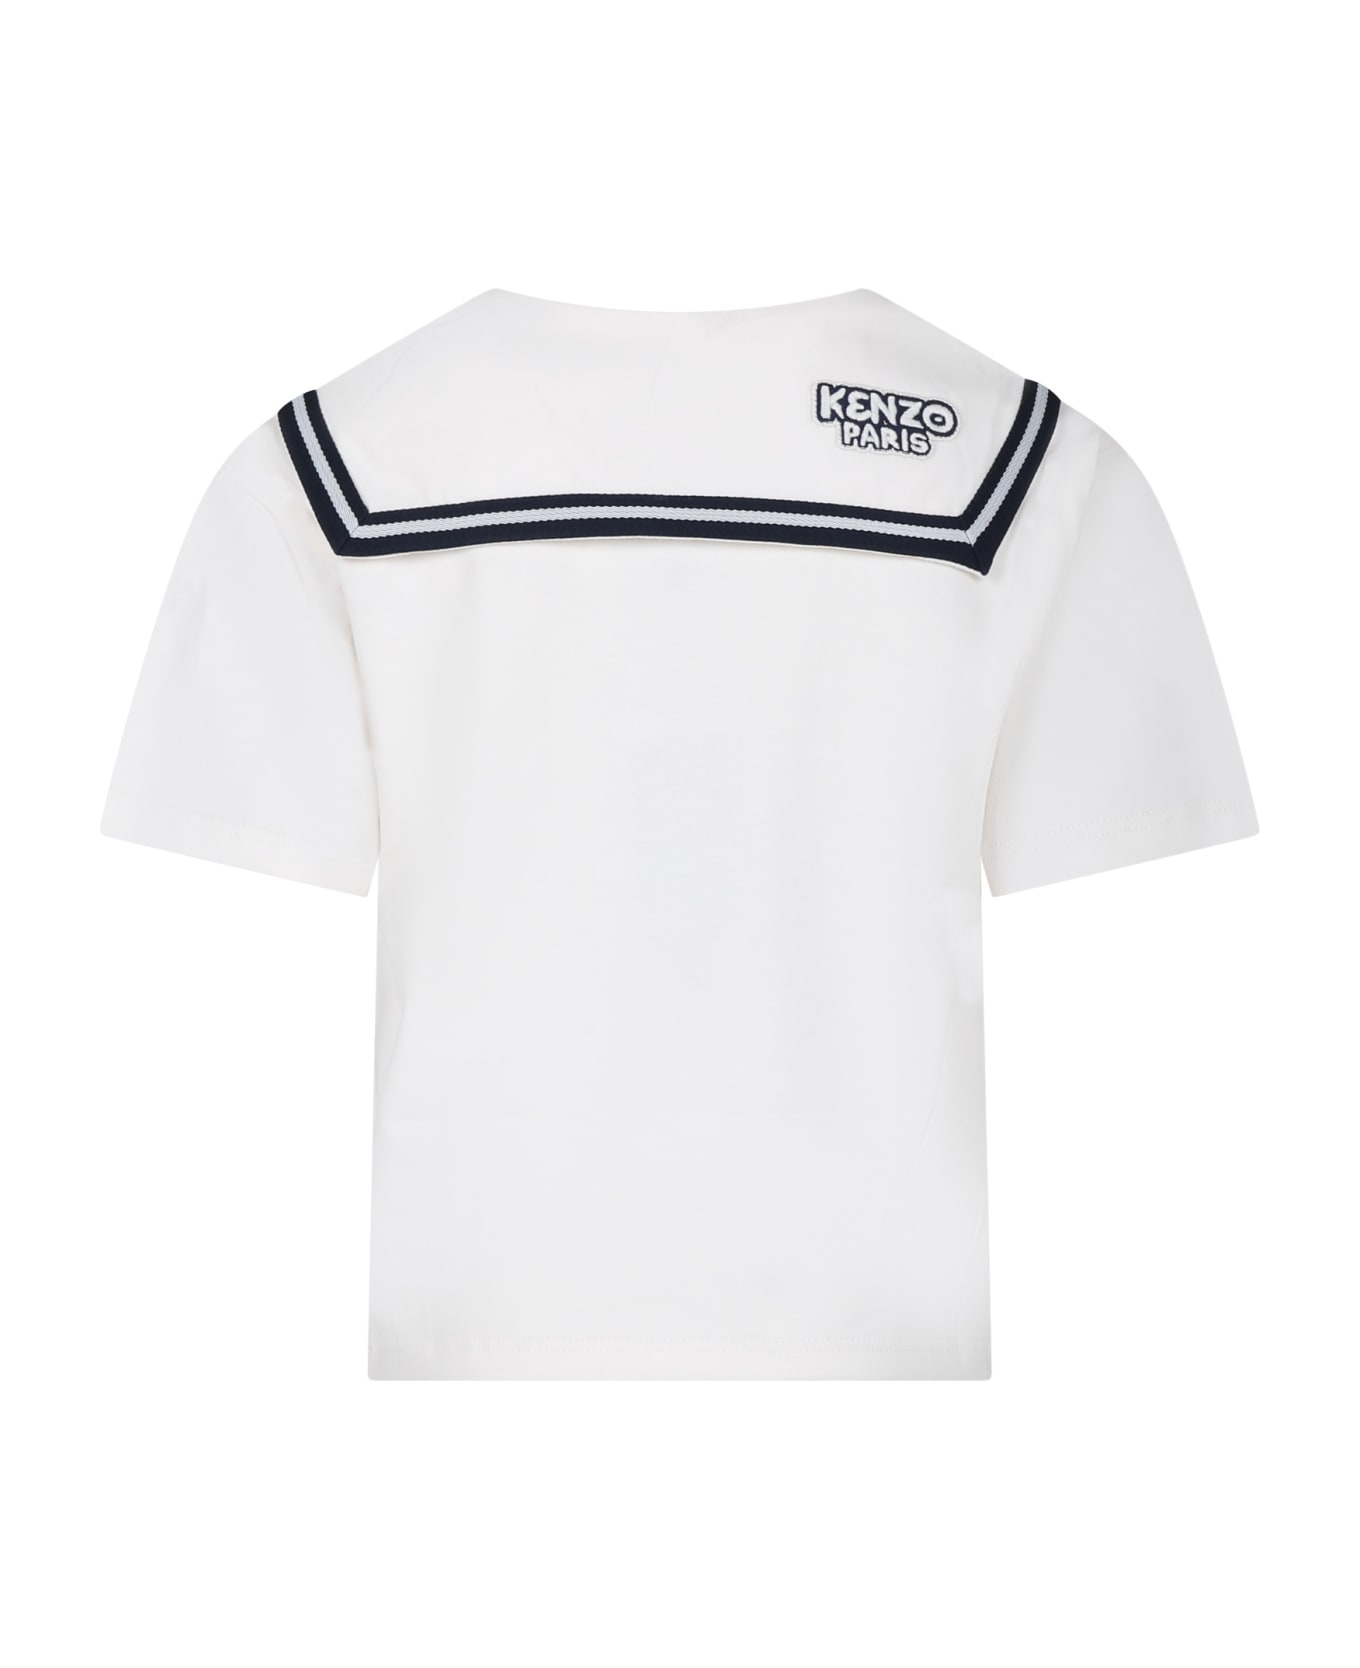 Kenzo Kids Ivory T-shirt For Boy With Logo Patch - Ivory